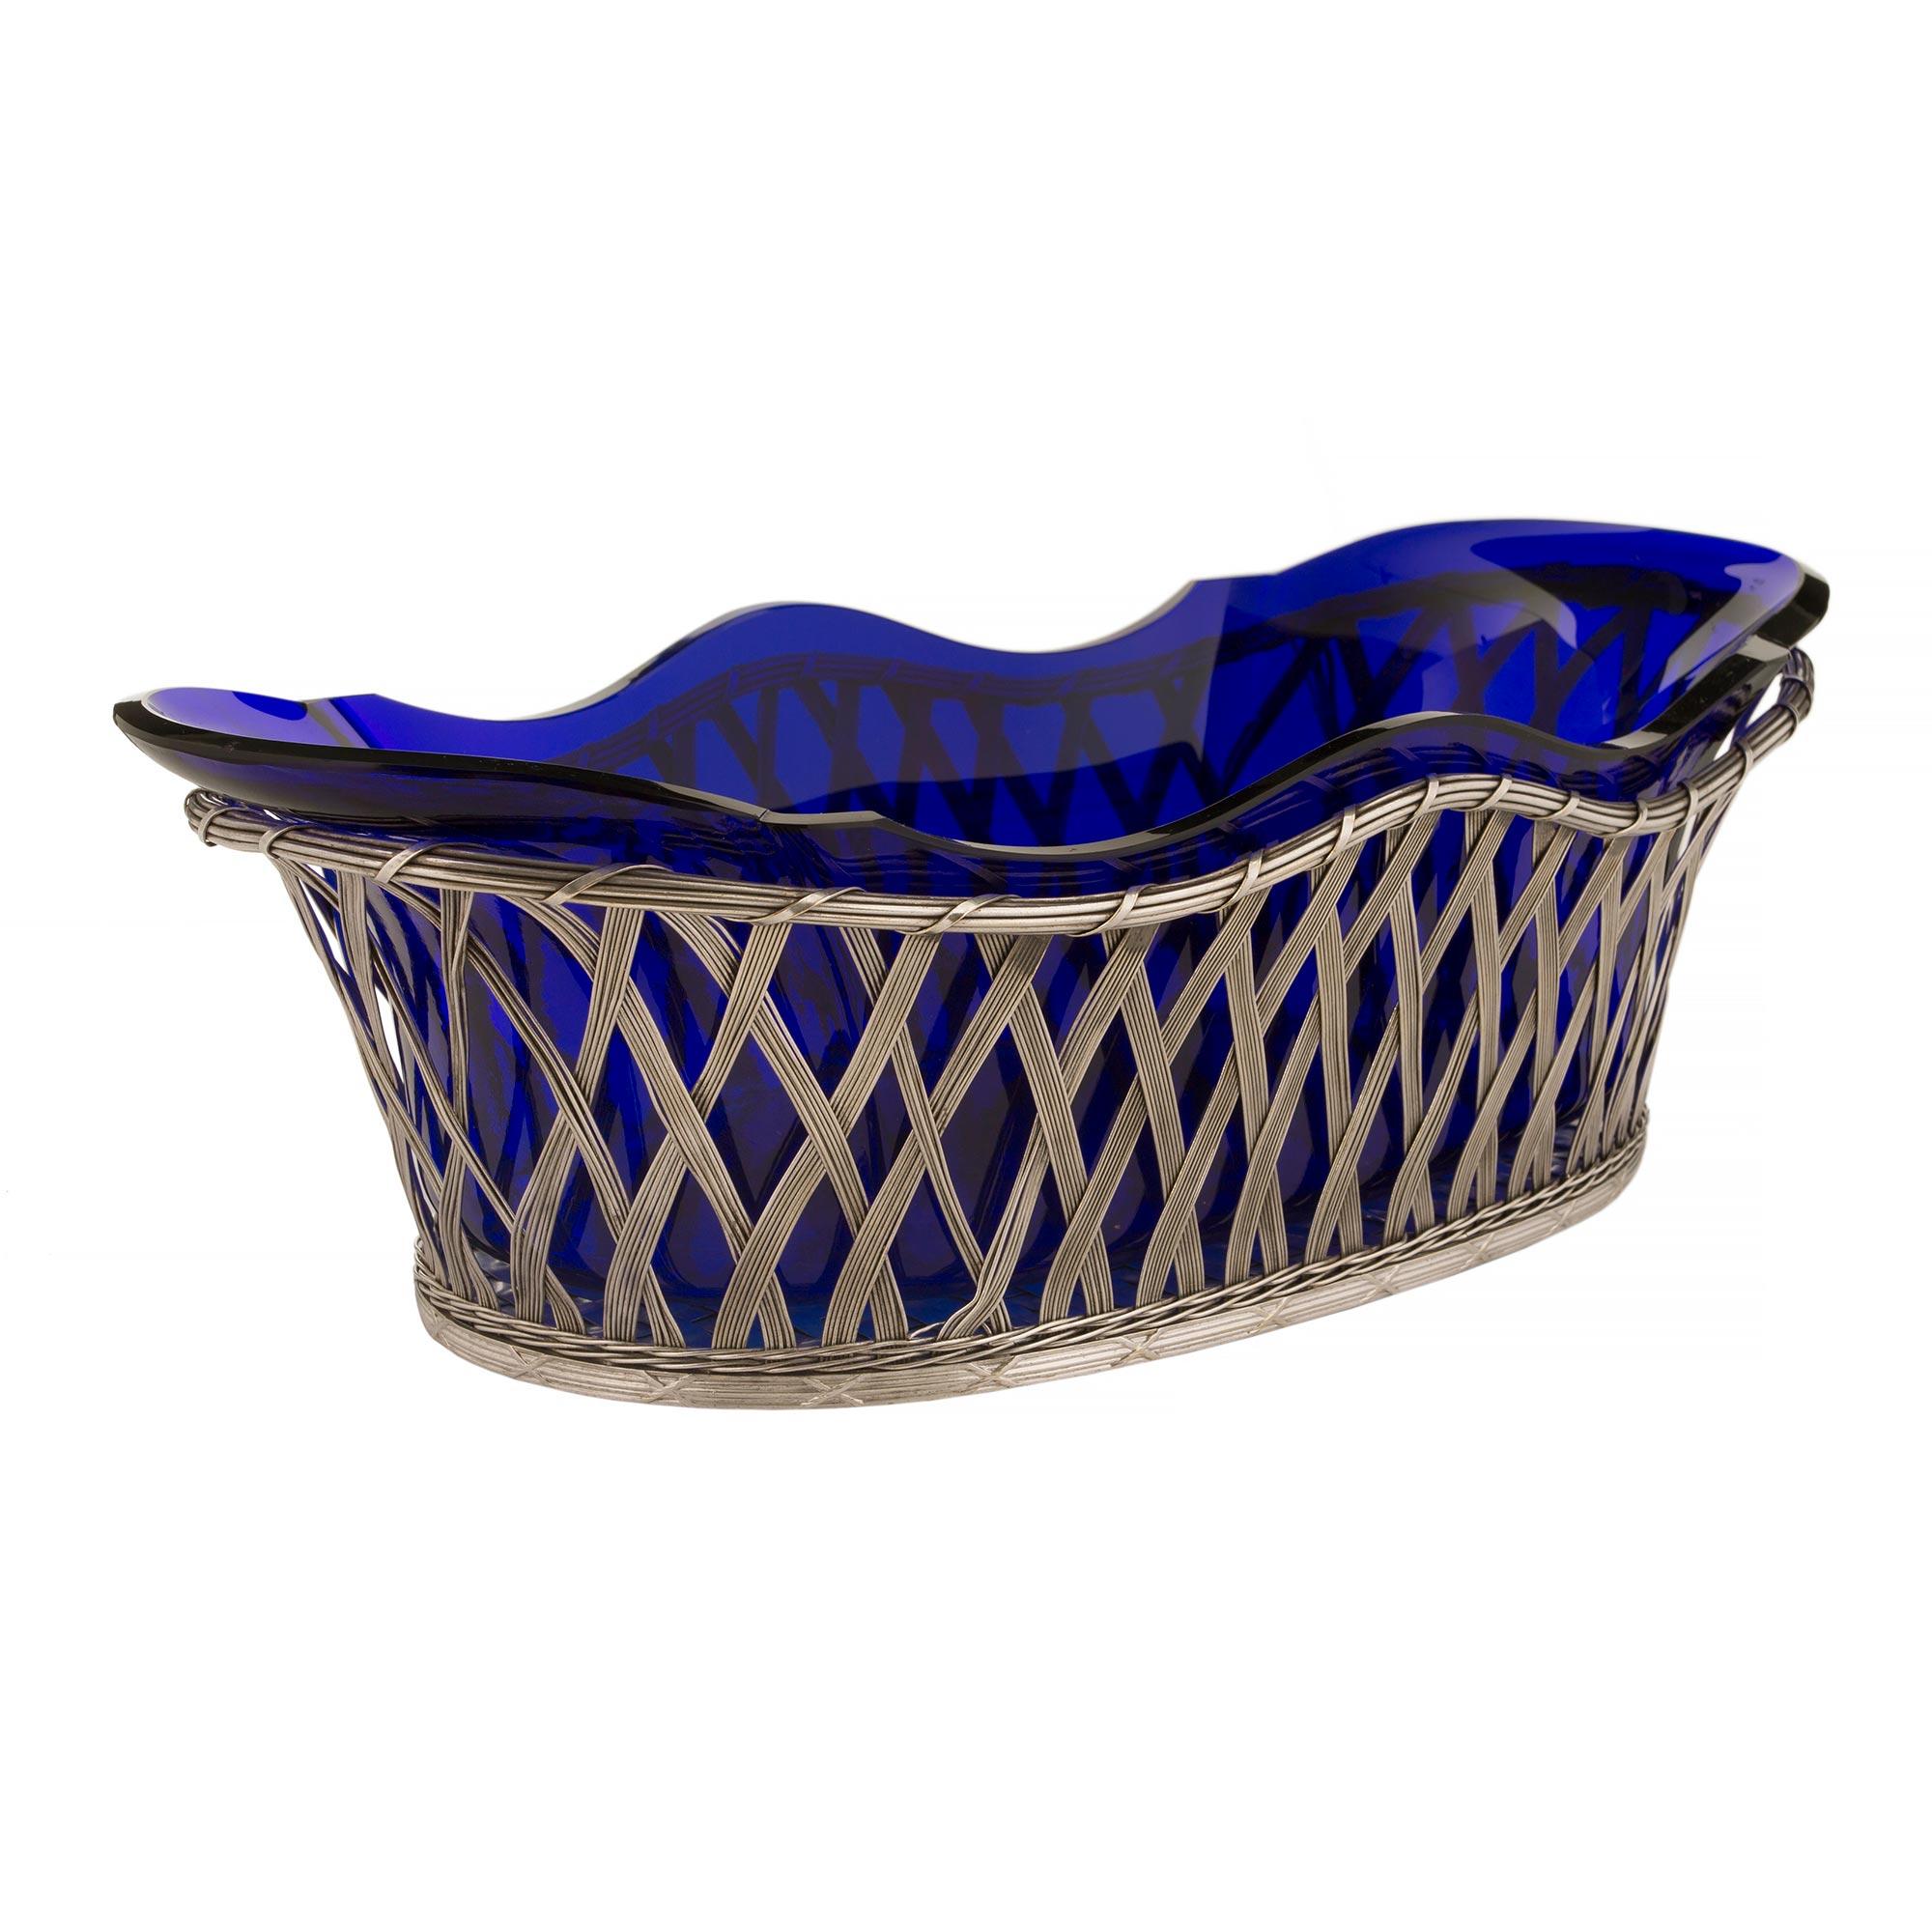 An elegant French 19th century Louis XVI st. silvered bronze centerpiece with a cobalt blue glass insert. The oval shaped centerpiece has a weave design with a scalloped shape. The basket has an X decoration at the base and a spiral looped top